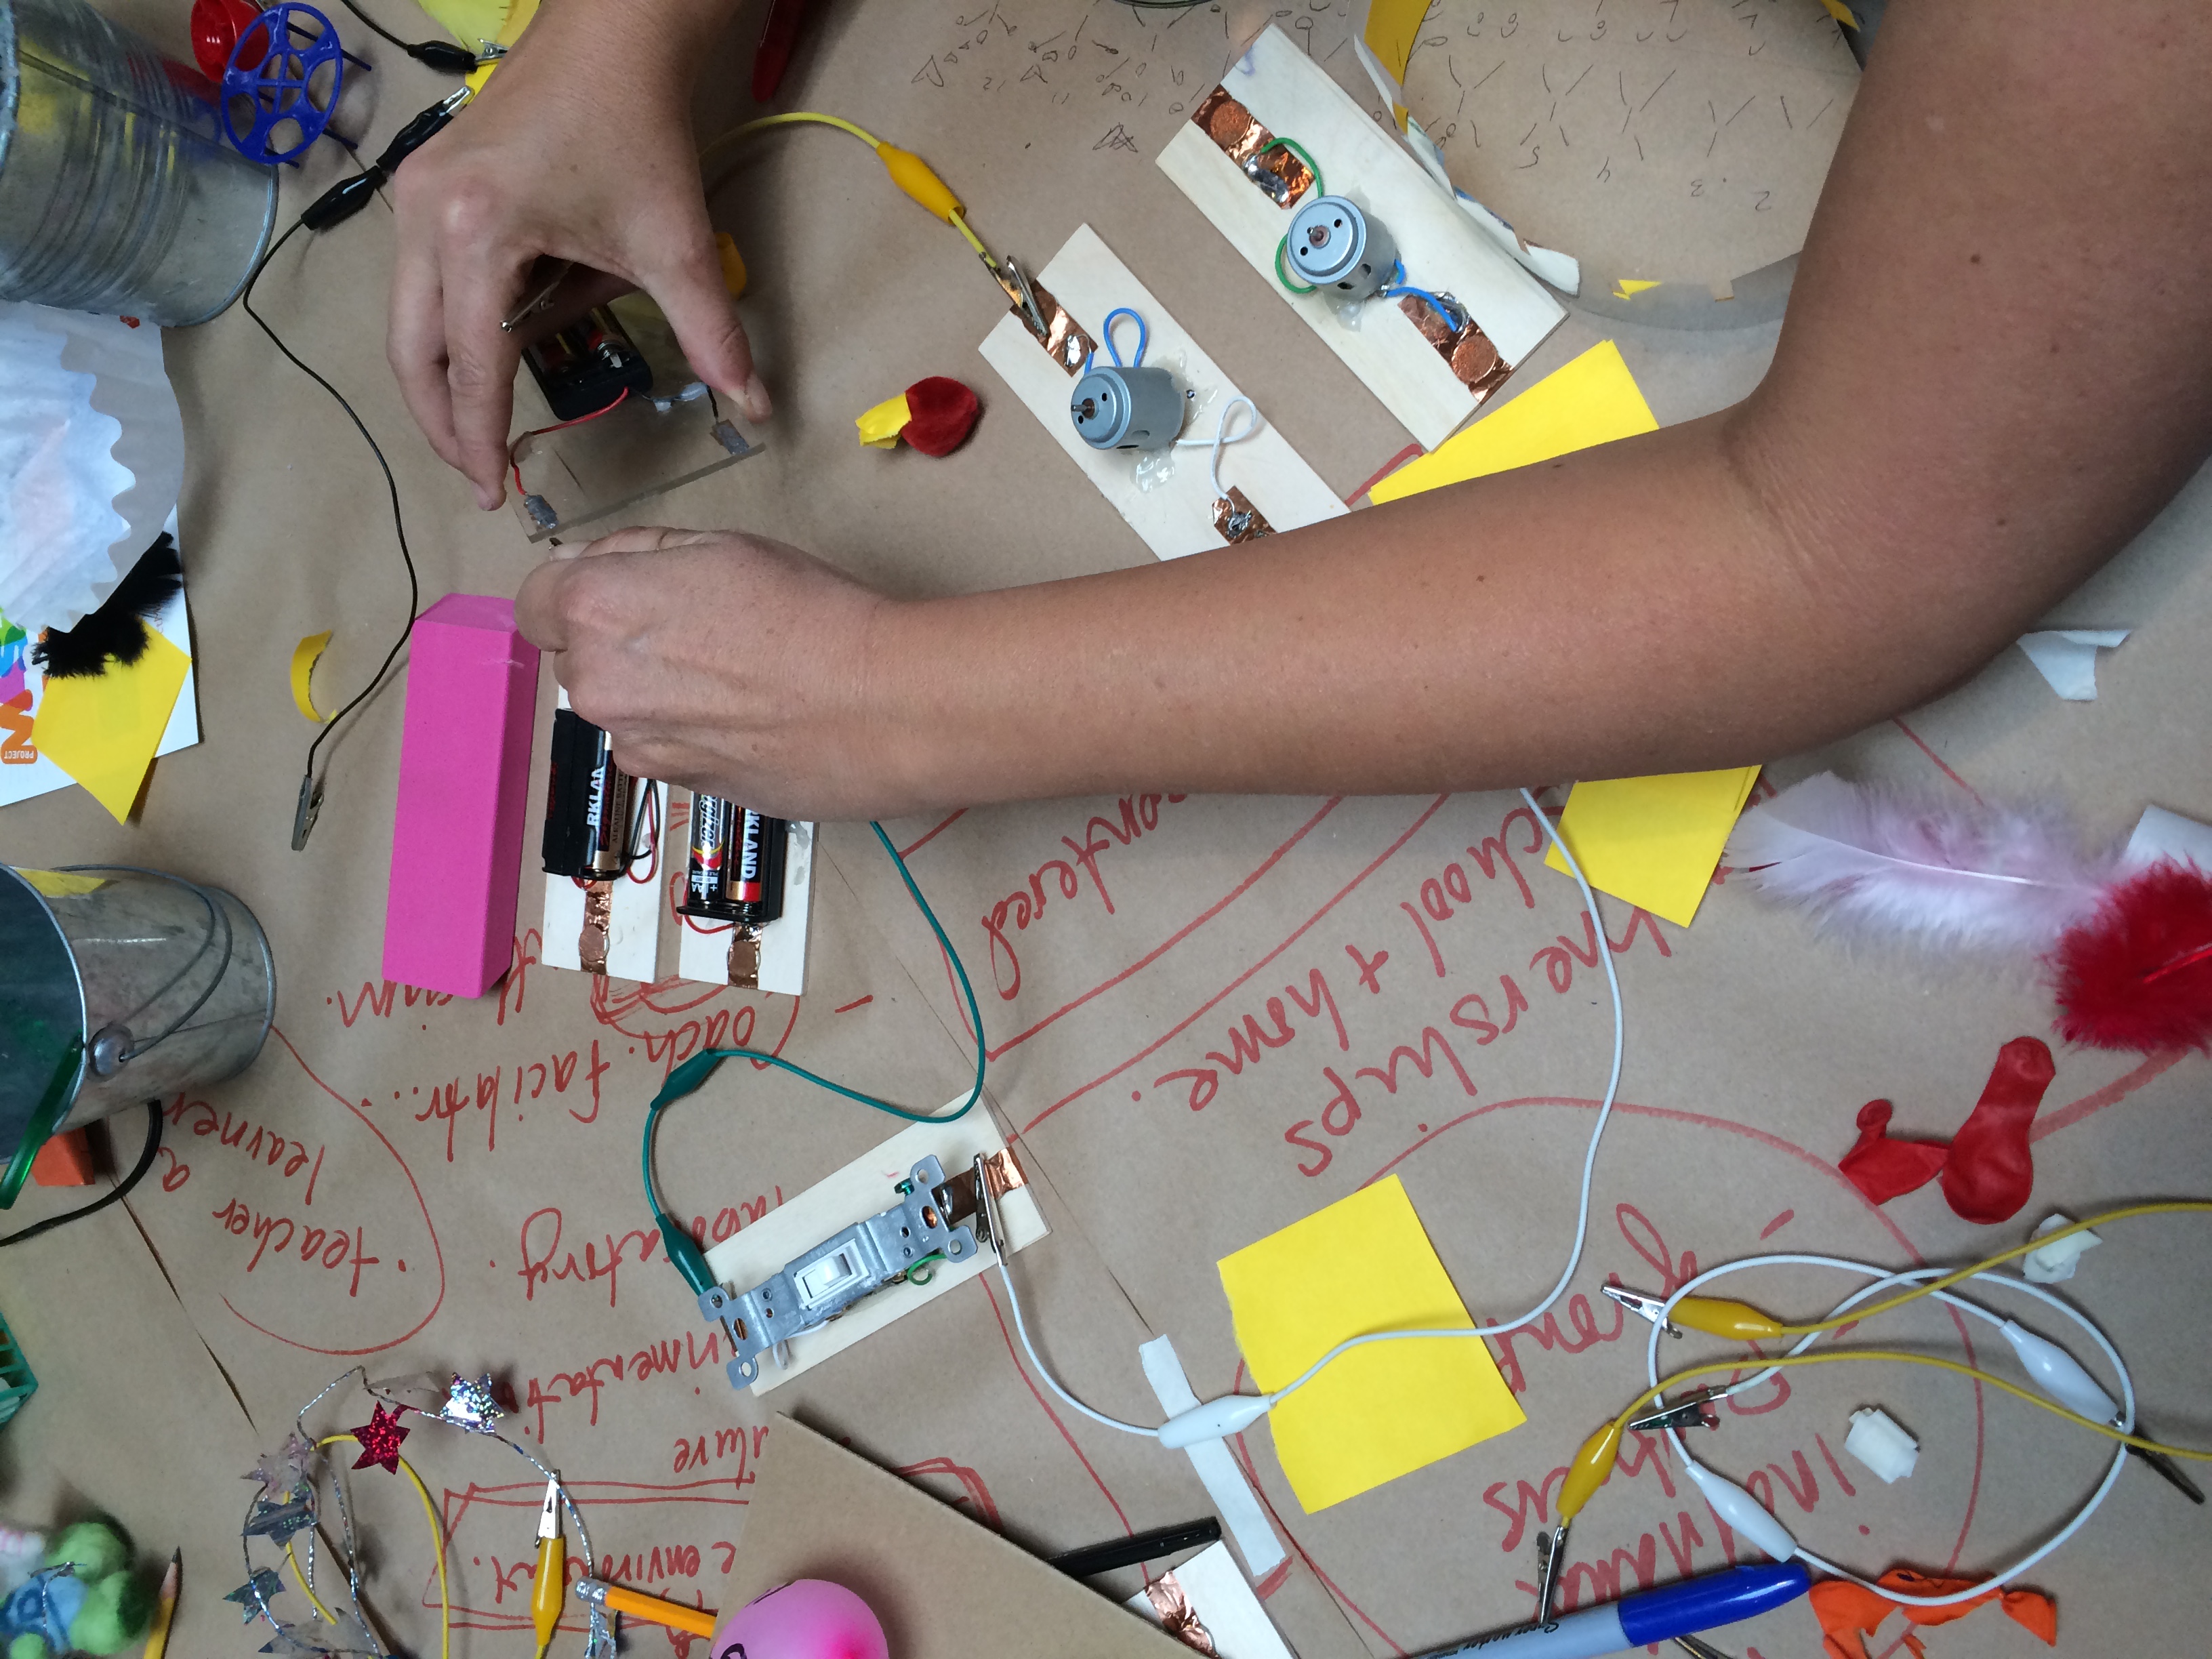 Making with Makey-Makeys